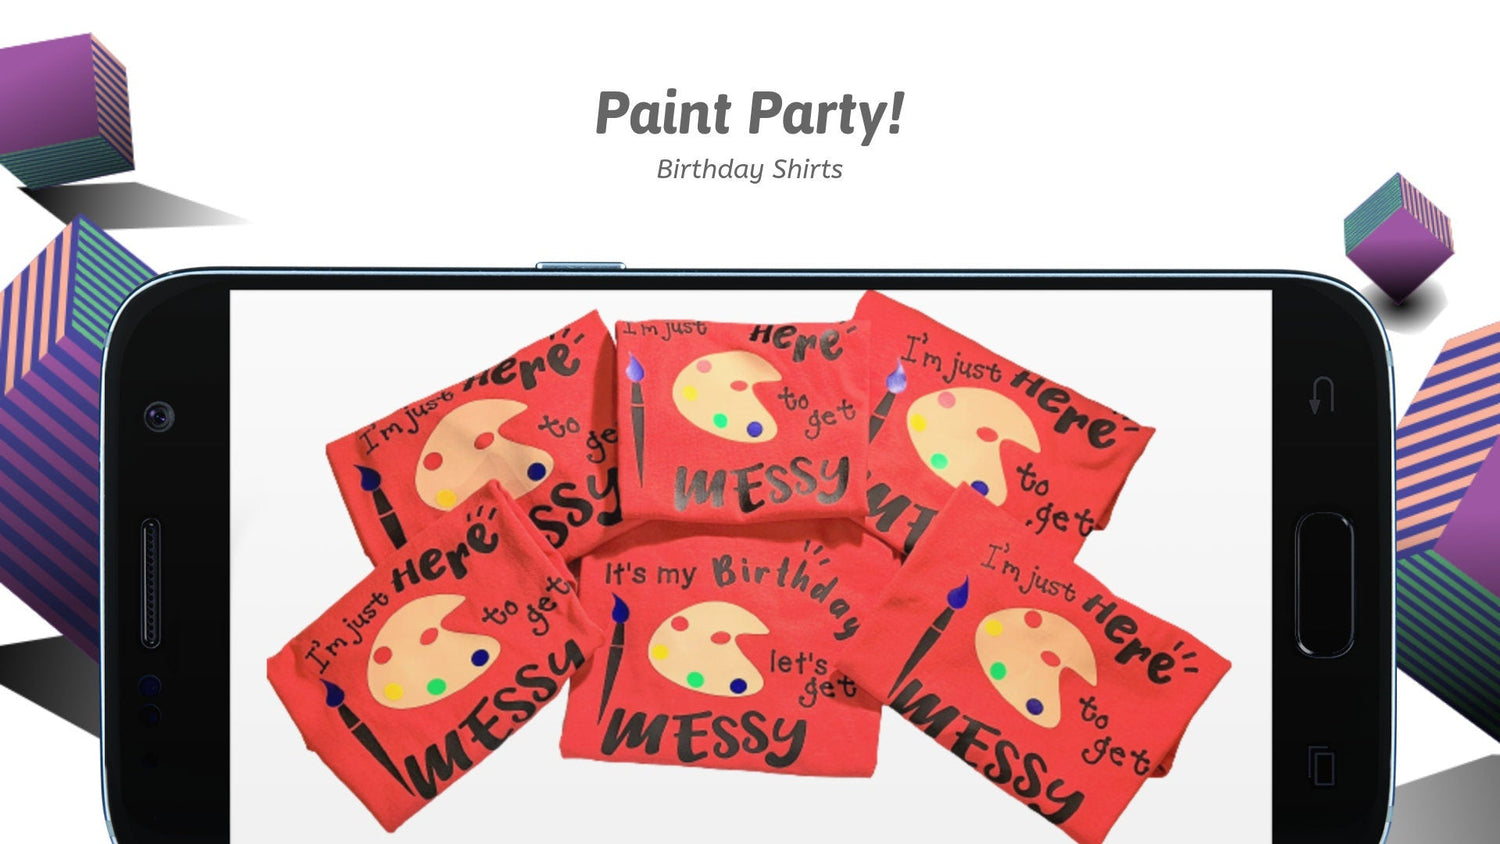 Paint Party T-Shirt, Kids Paint Party, Birthday T-Shirt, Art Party T-Shirt, Party Shirts, Matching Shirts, Artist Shirts, Paint Party B1ack By Design LLC 